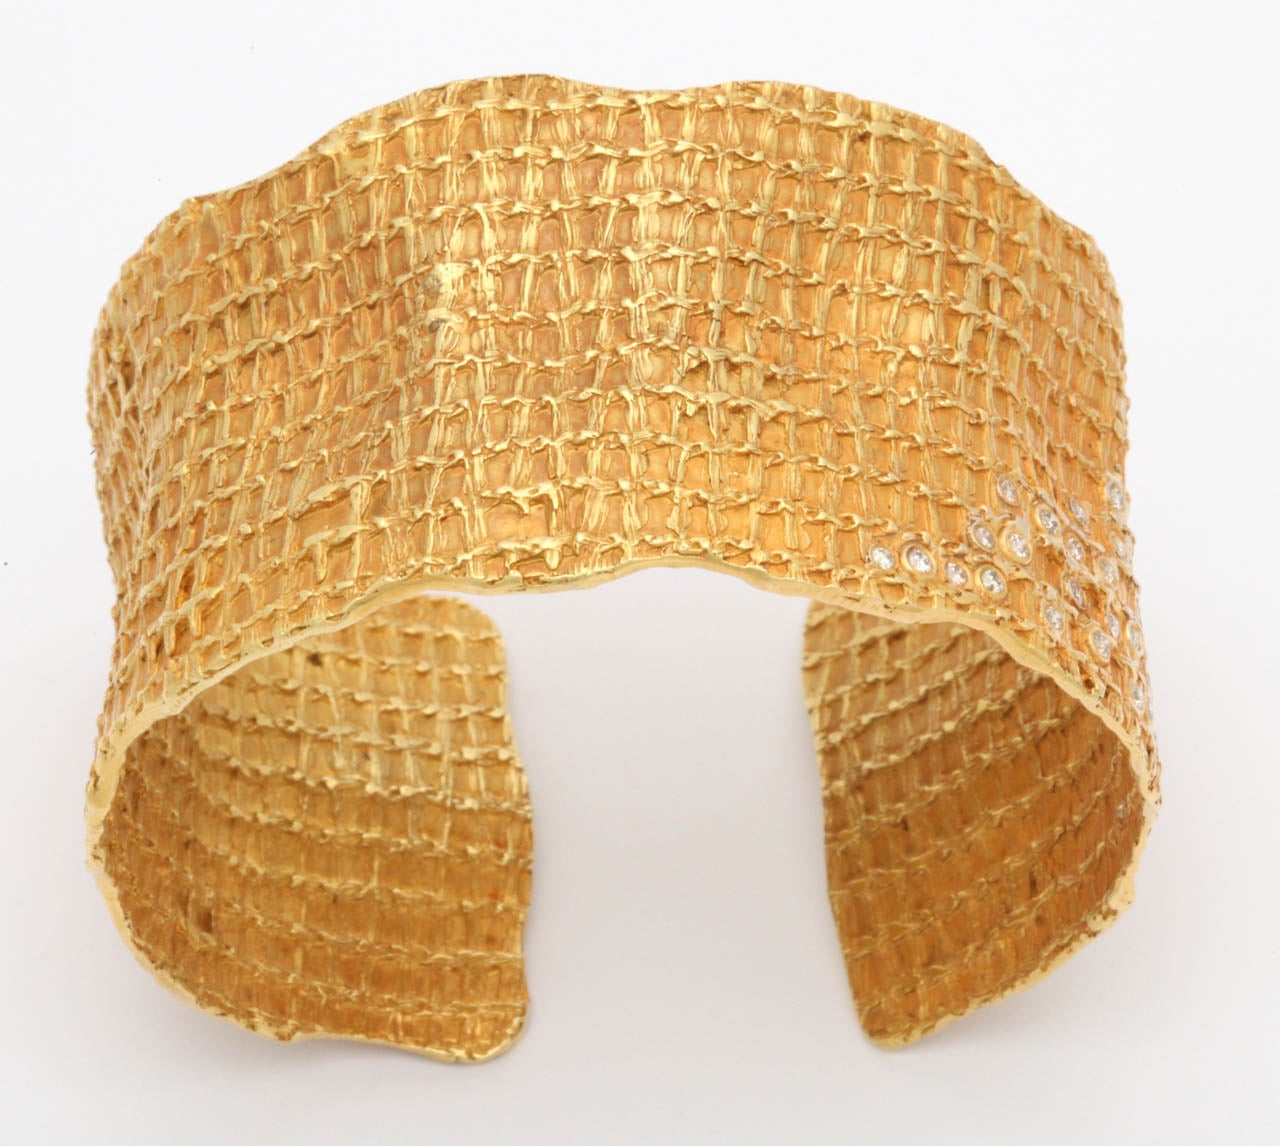 An 18kt yellow gold and diamond cuff. The cuff is fashioned after a piece of honeycomb and is set with approximately 1.45cts of diamonds.